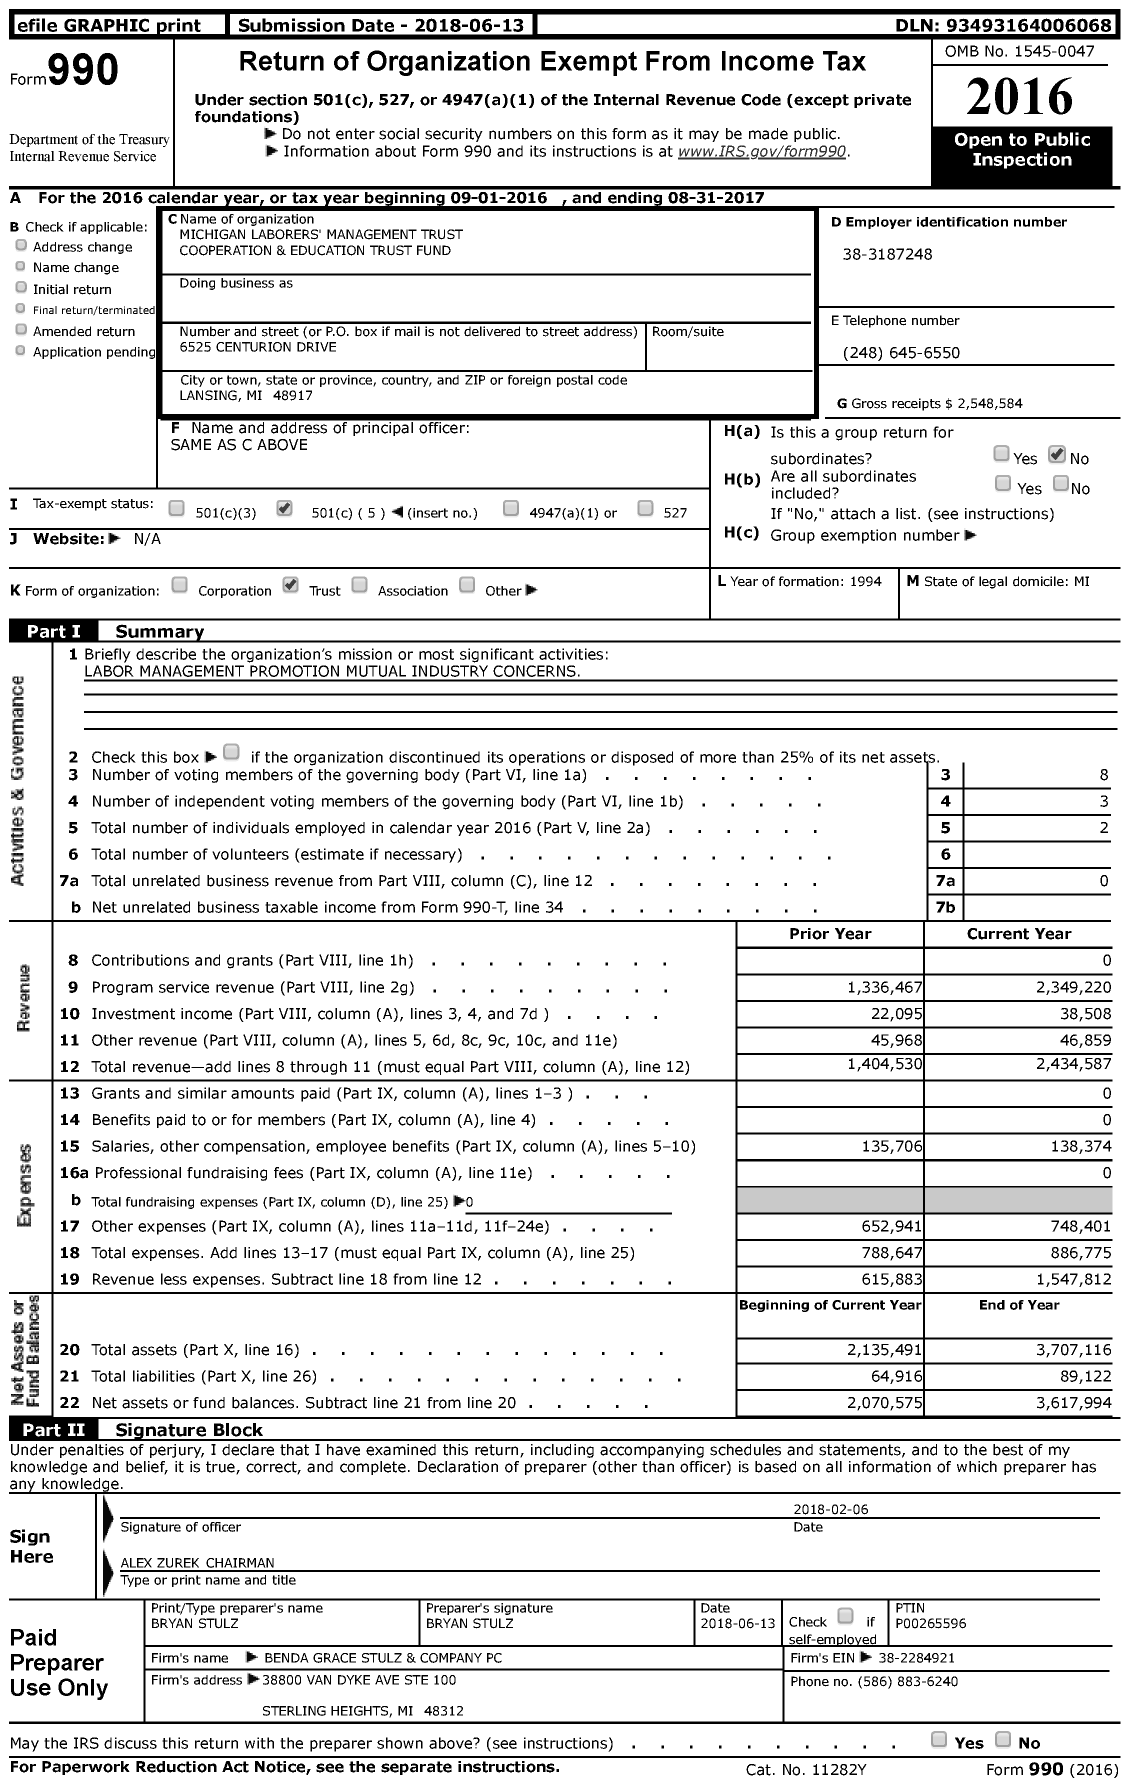 Image of first page of 2016 Form 990 for Michigan Laborers' Management Trust Cooperation and Education Trust Fund